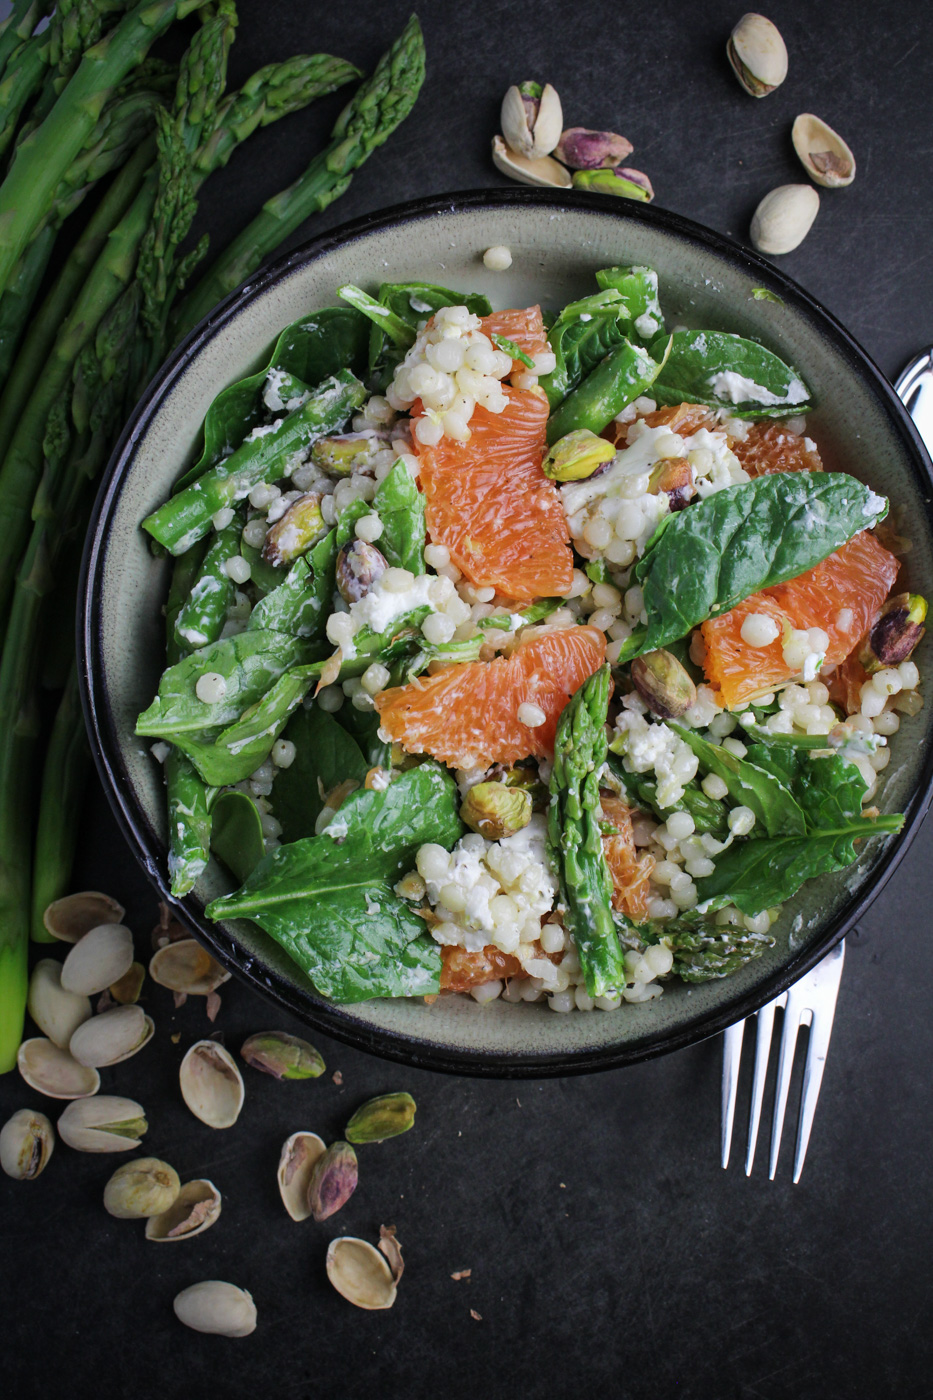 Lemony Israeli Couscous with Asparagus, Oranges, and Goat Cheese {Katie at the Kitchen Door}